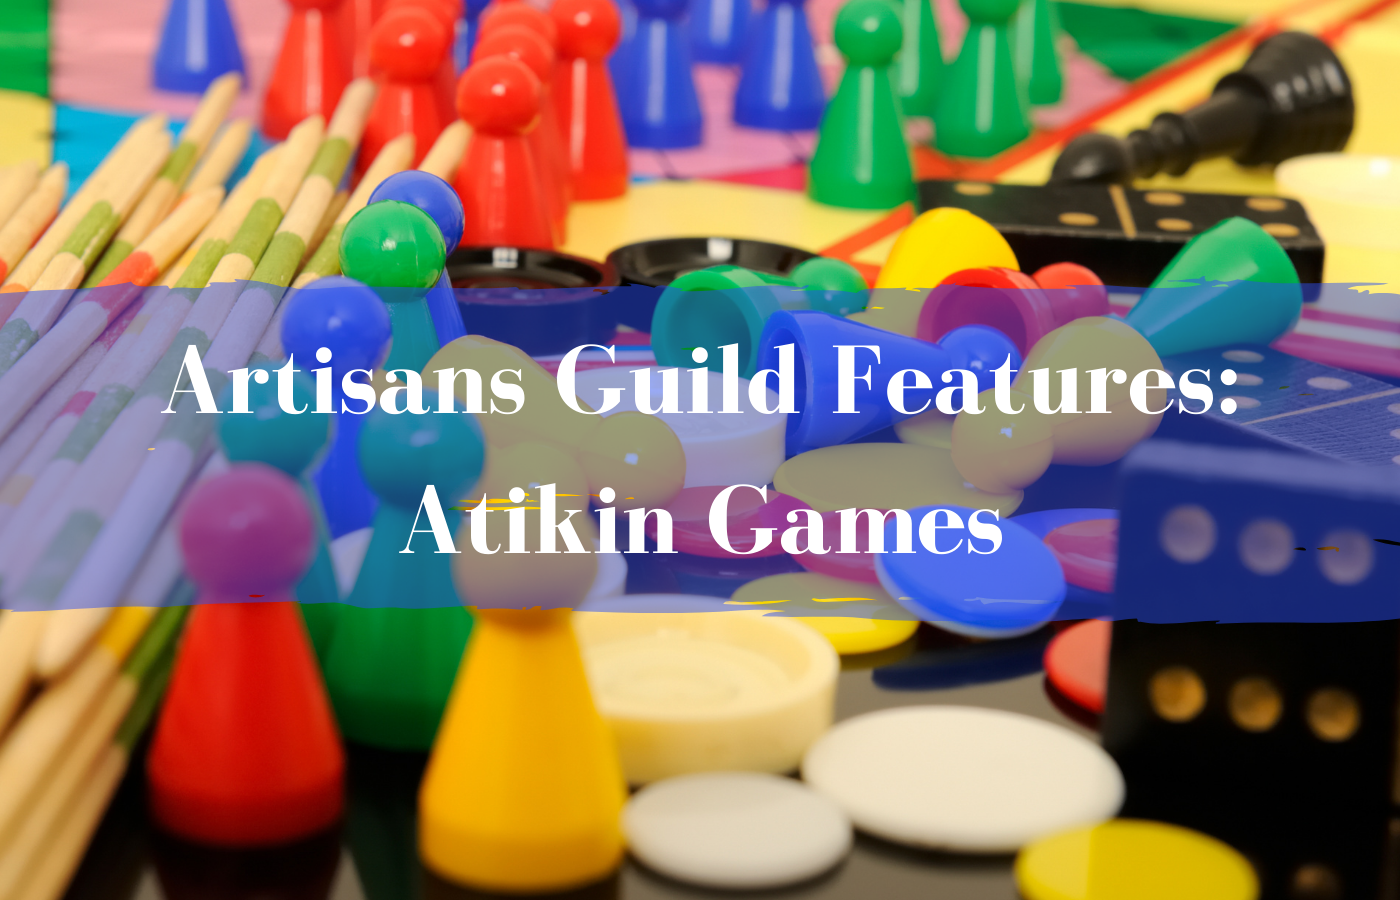 Artisans Guild Features Atikin Games. Game Pieces in the background.